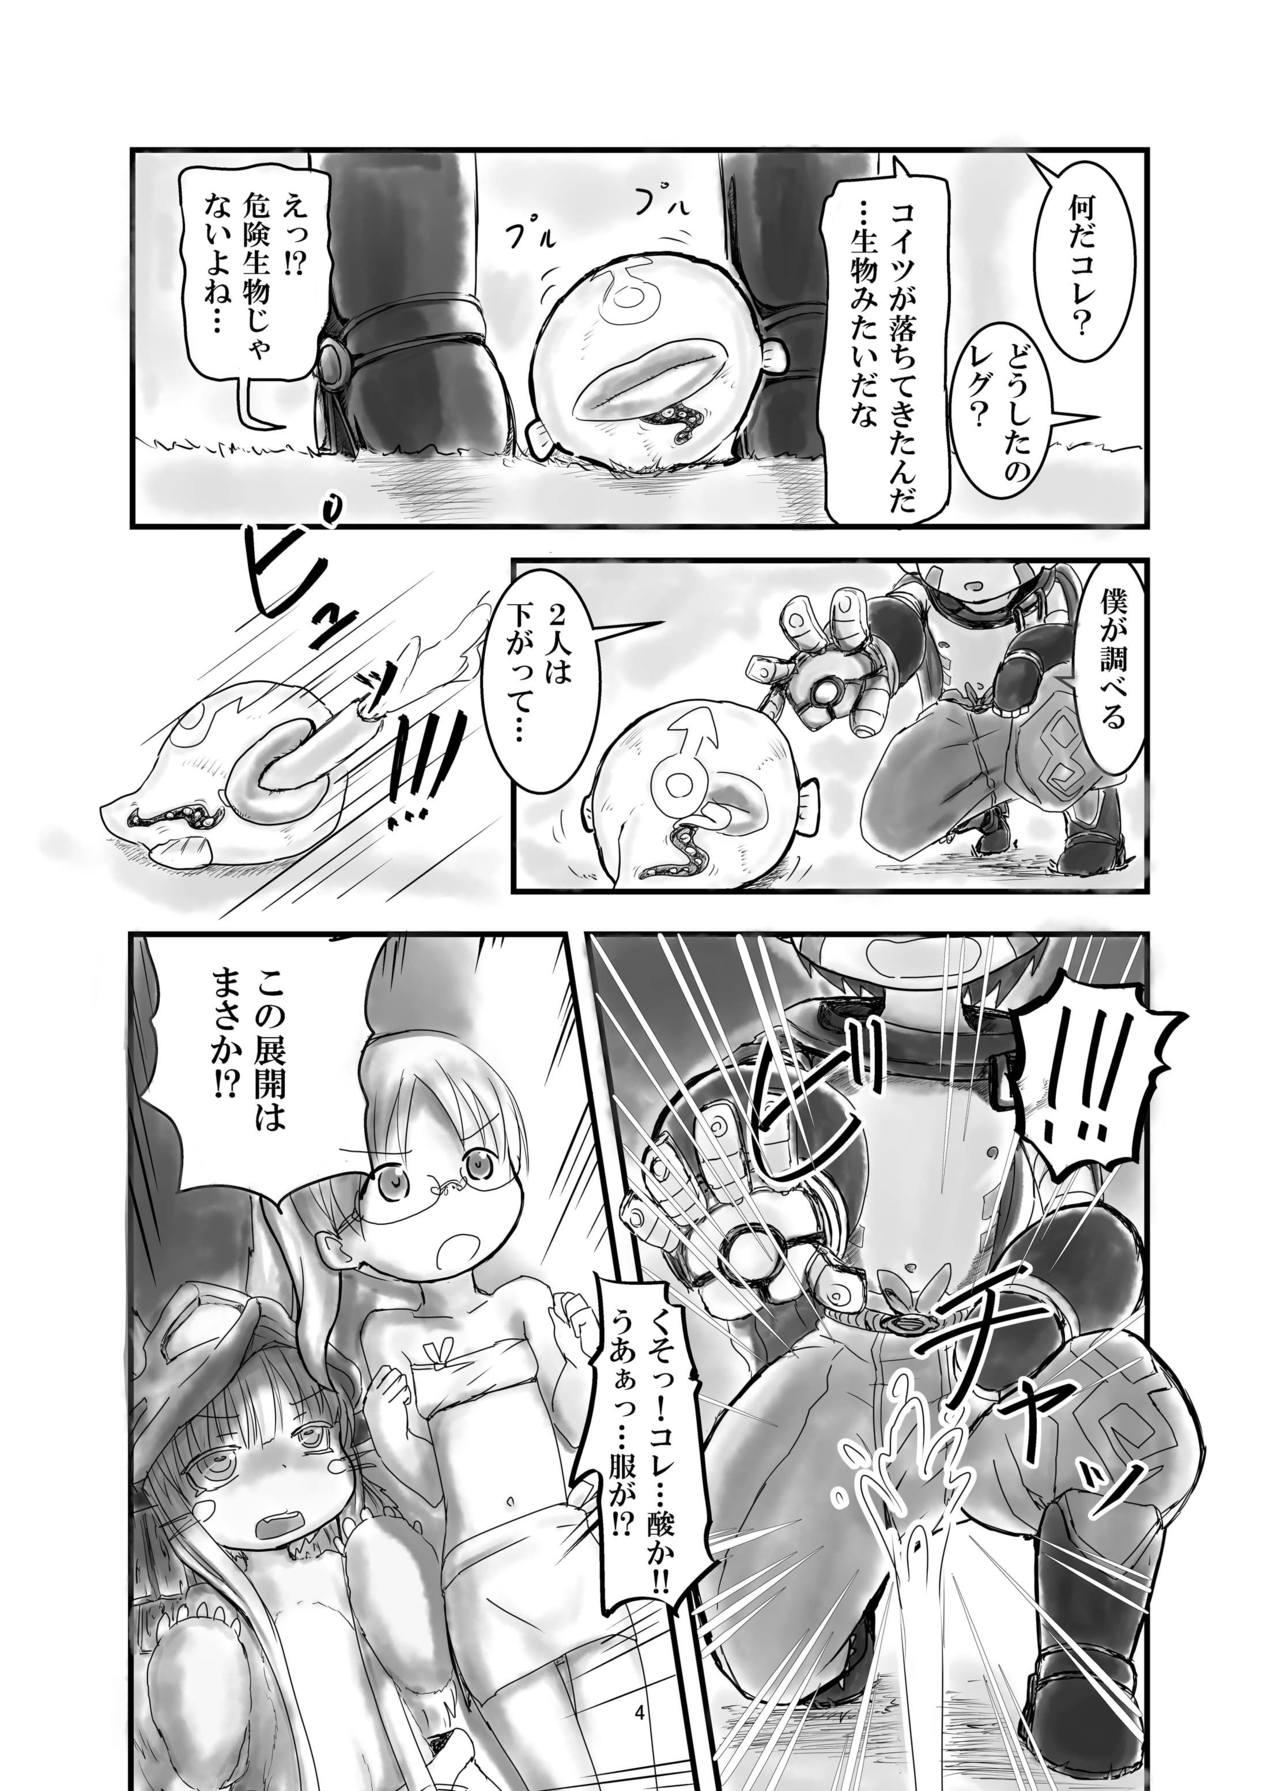 Cutie Regu Chin - Made in abyss Cheerleader - Page 4